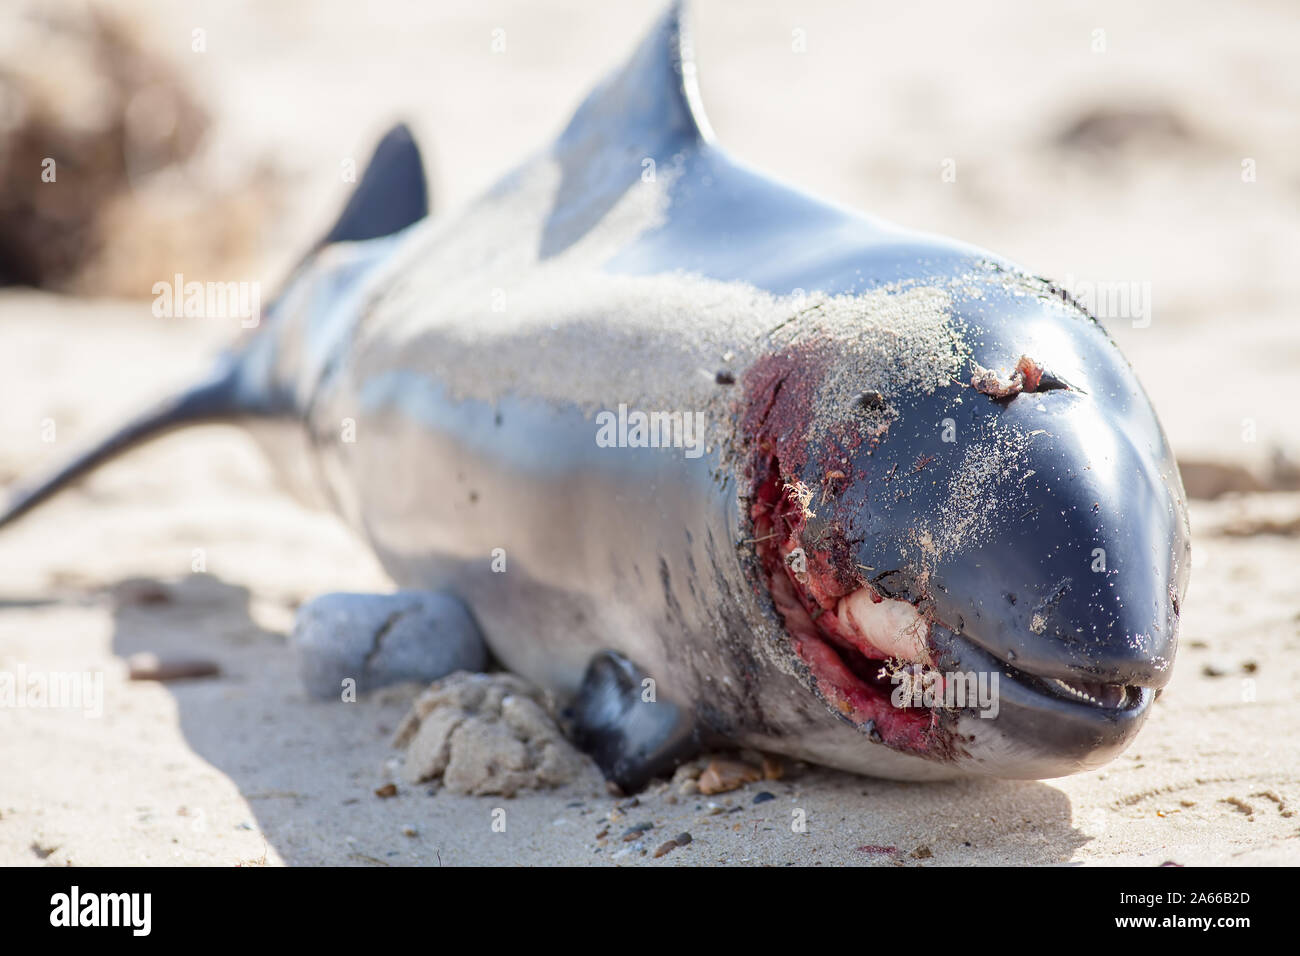 Dead porpoise or dolphin with horrific wound from propeller strike. Beached body of marine mammal with vessel prop cut injury. Animal carcass with dee Stock Photo